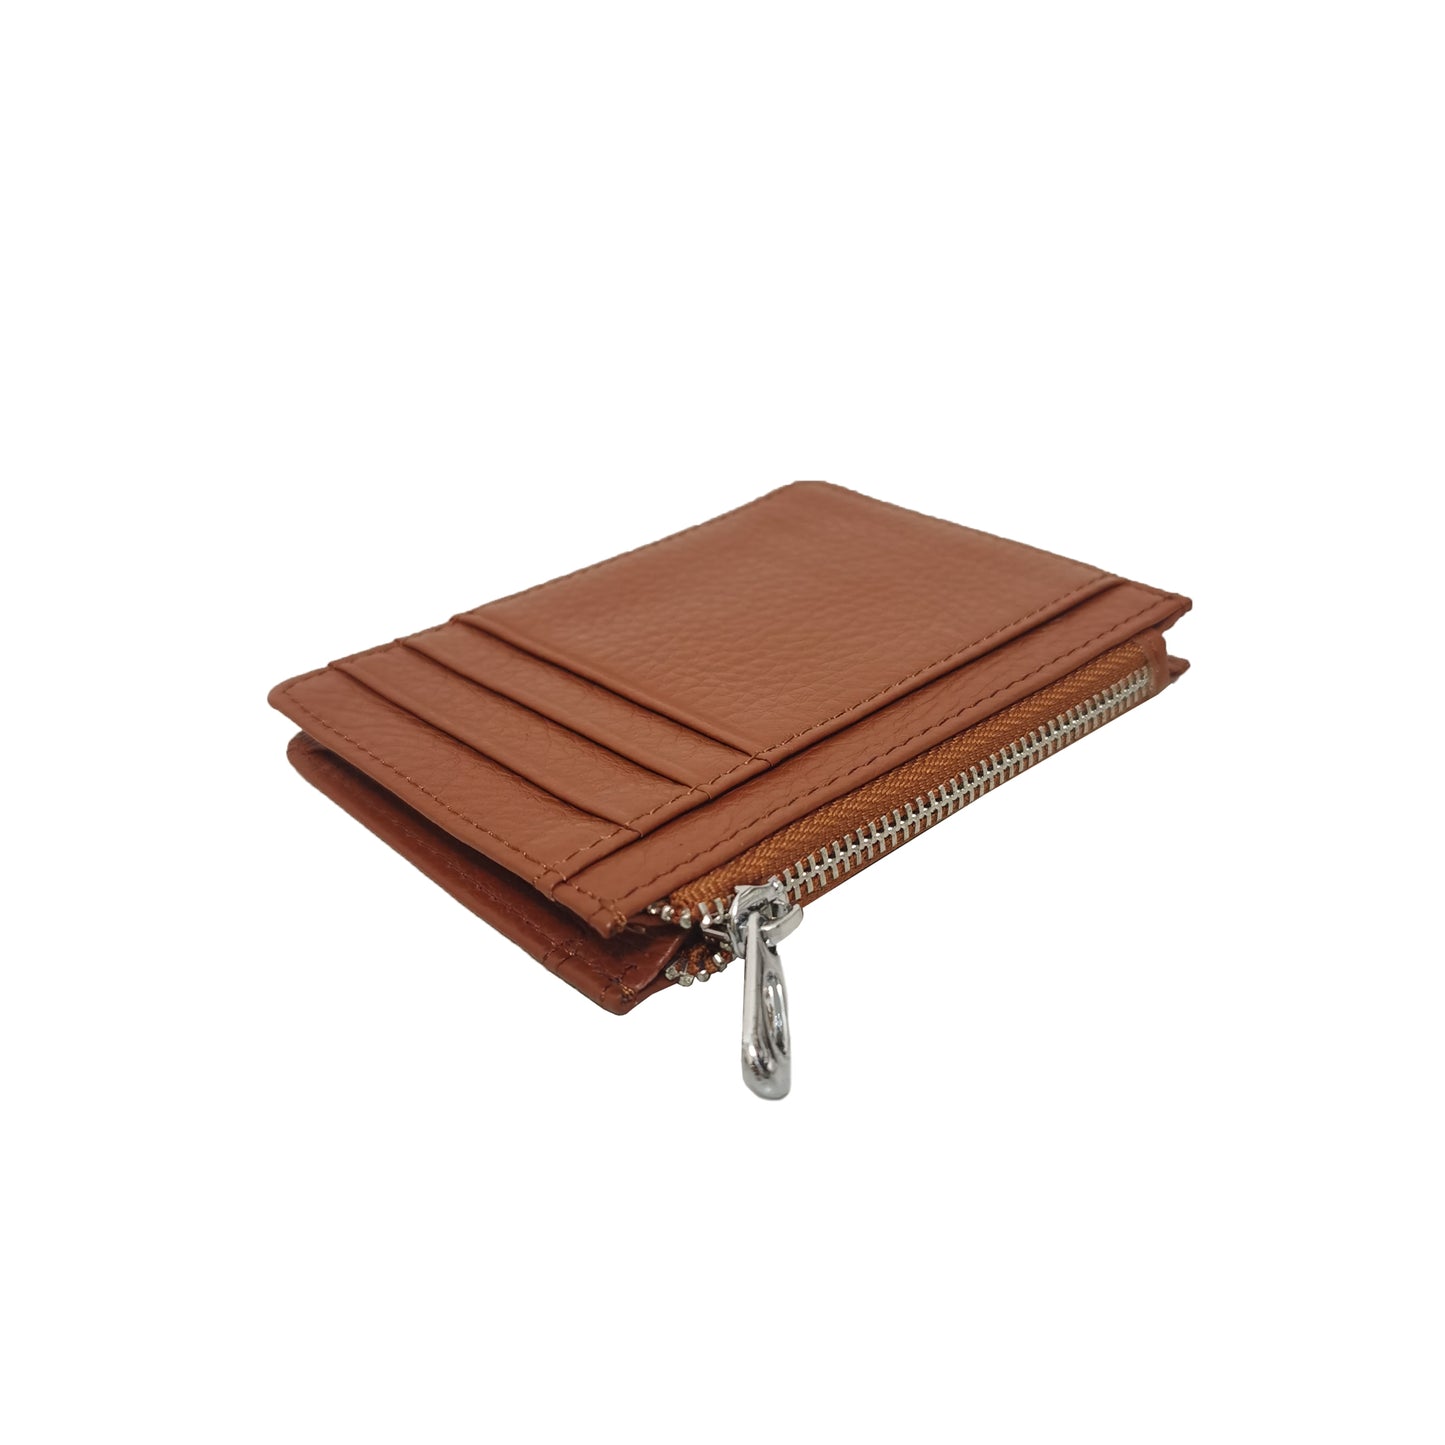 Unisex genuine cowhide leather card holder with zip by Tomorrow Closet